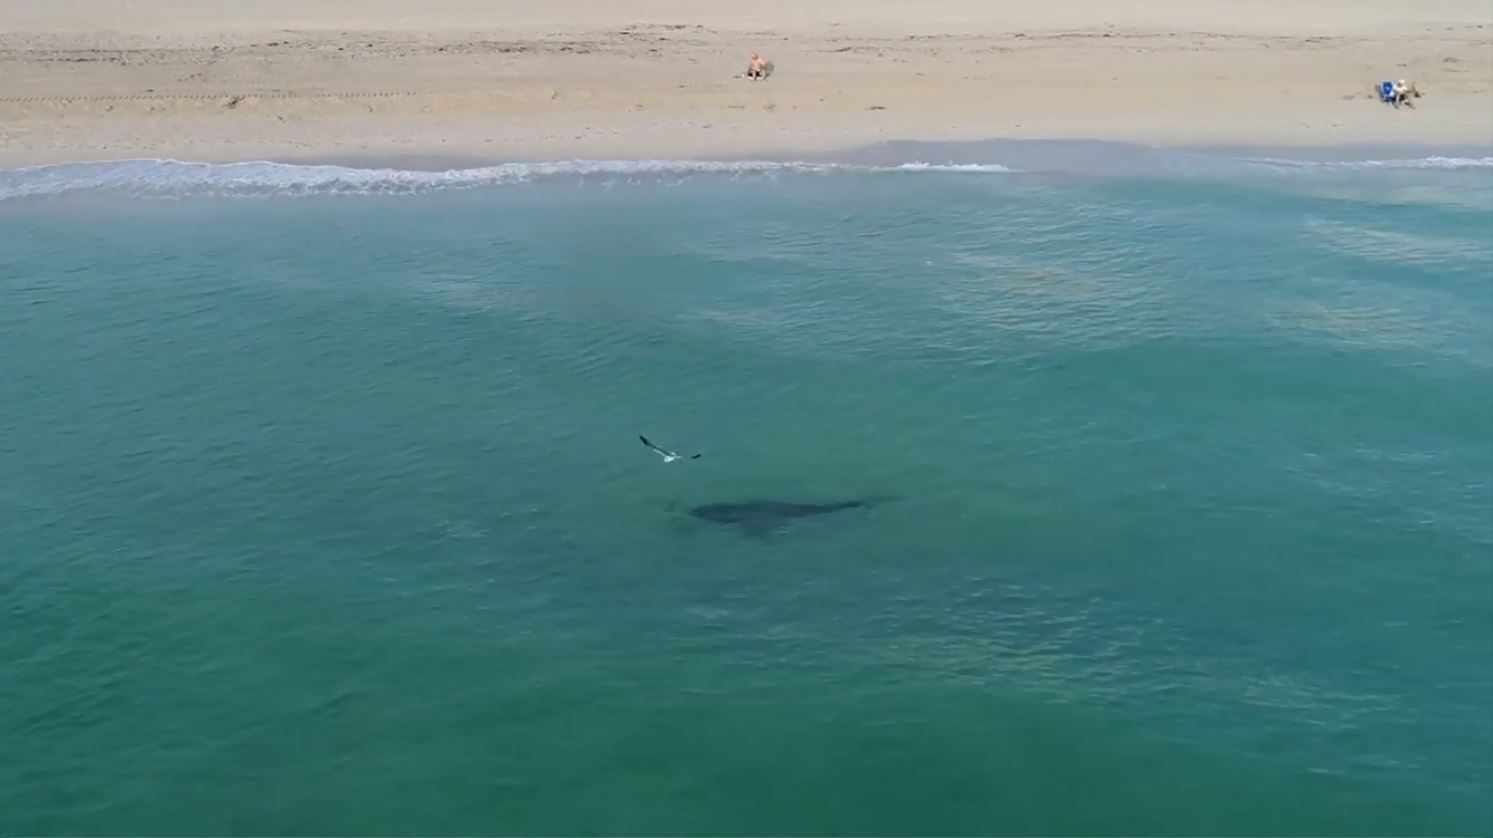 A shark is spotted from above swimming dangerously close to the shore.